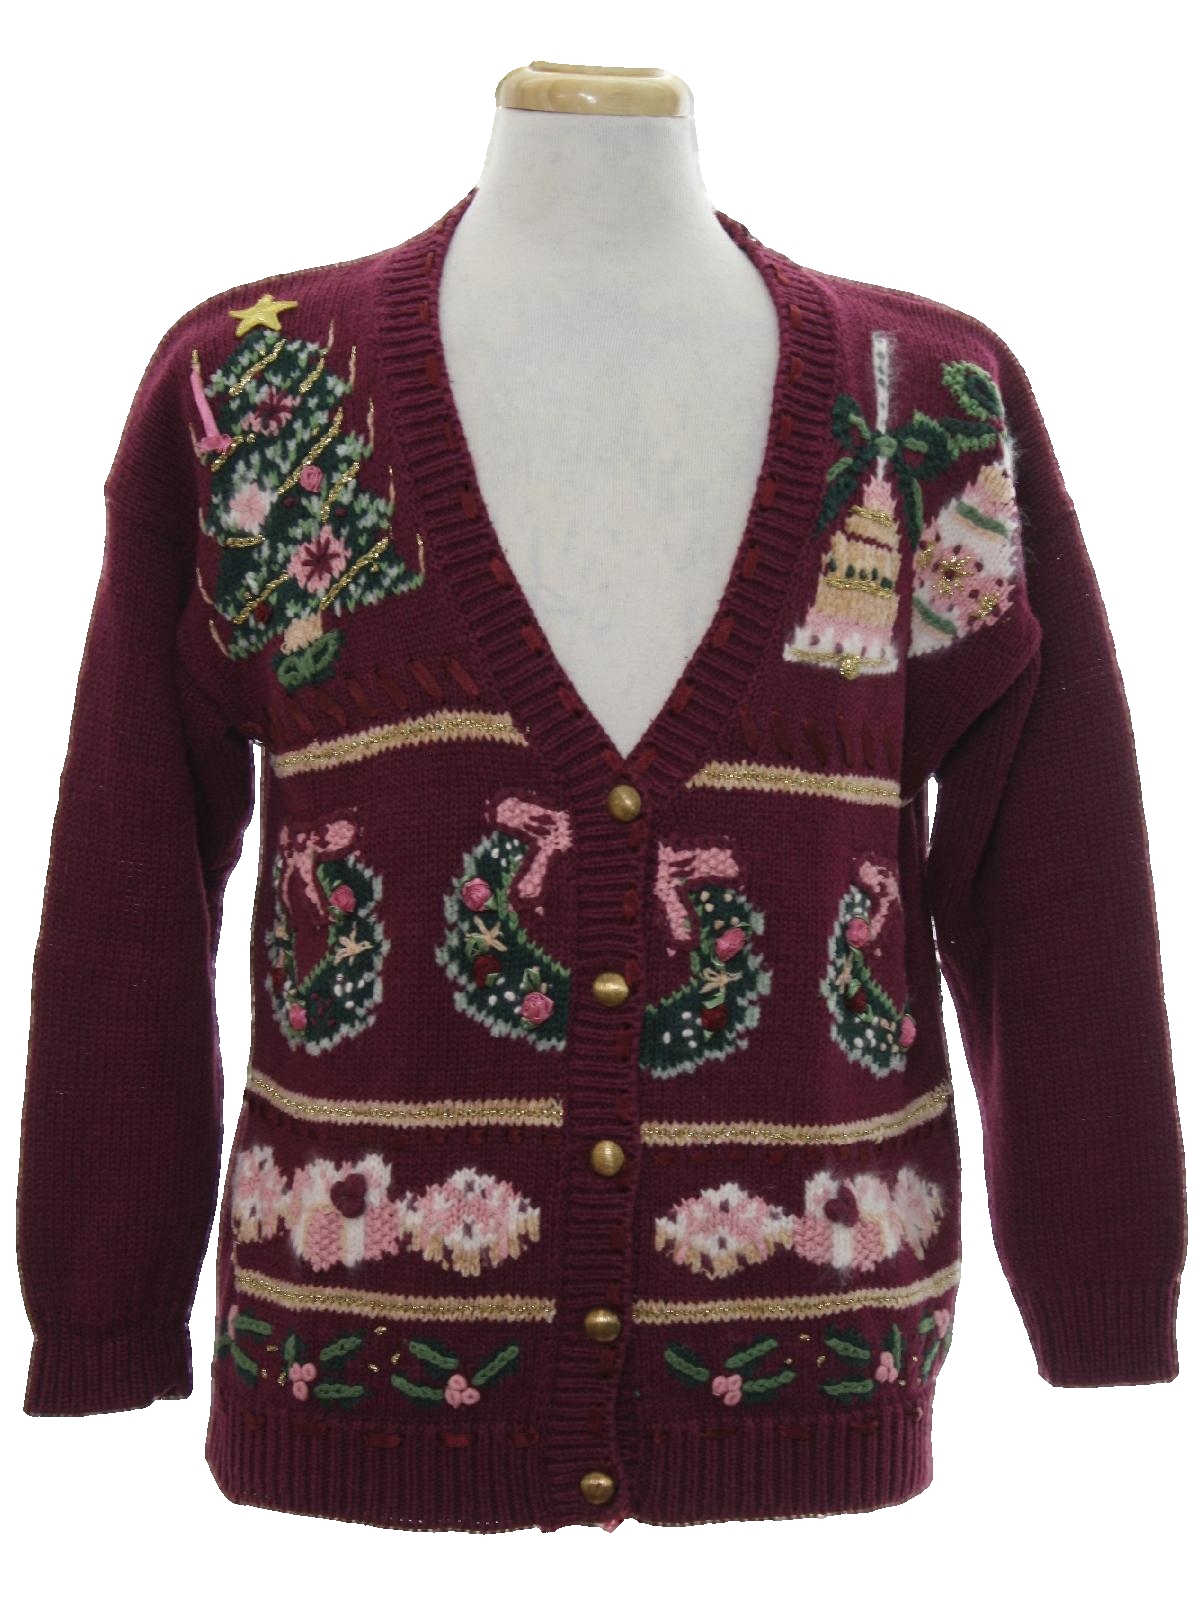 Ugly Christmas Cardigan Sweater: -Hand-Knit Erica- Unisex mulberry ...